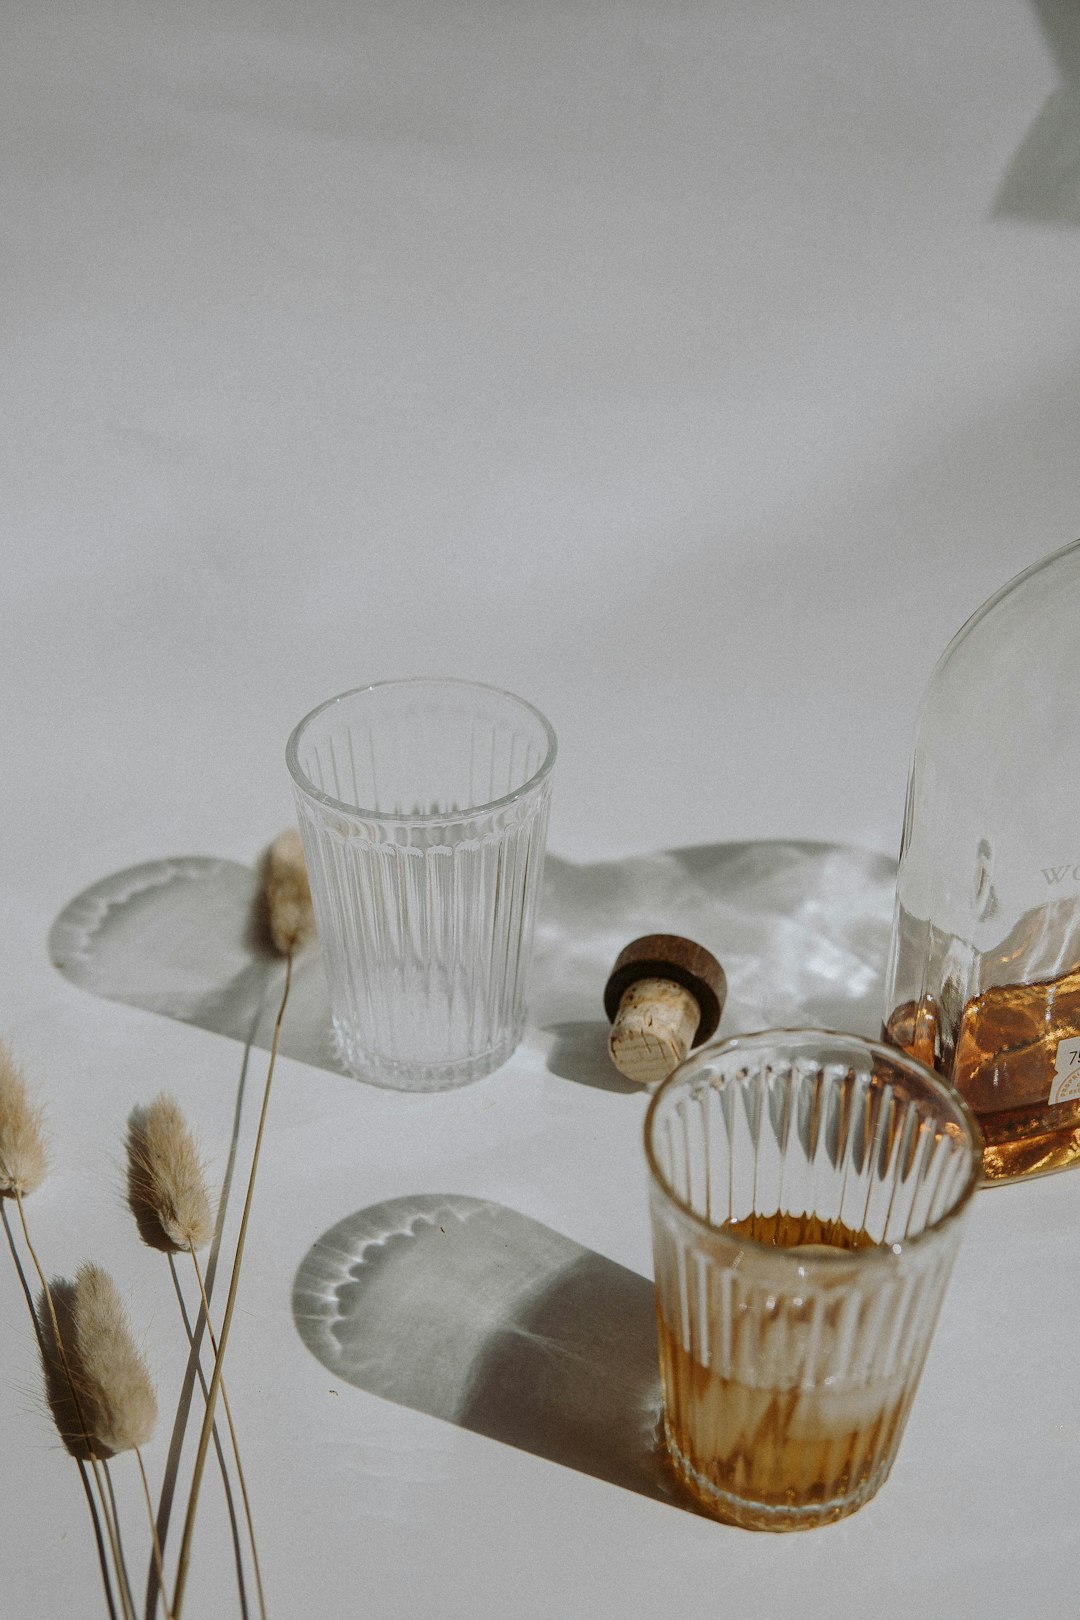 clear drinking glass on white table cloth